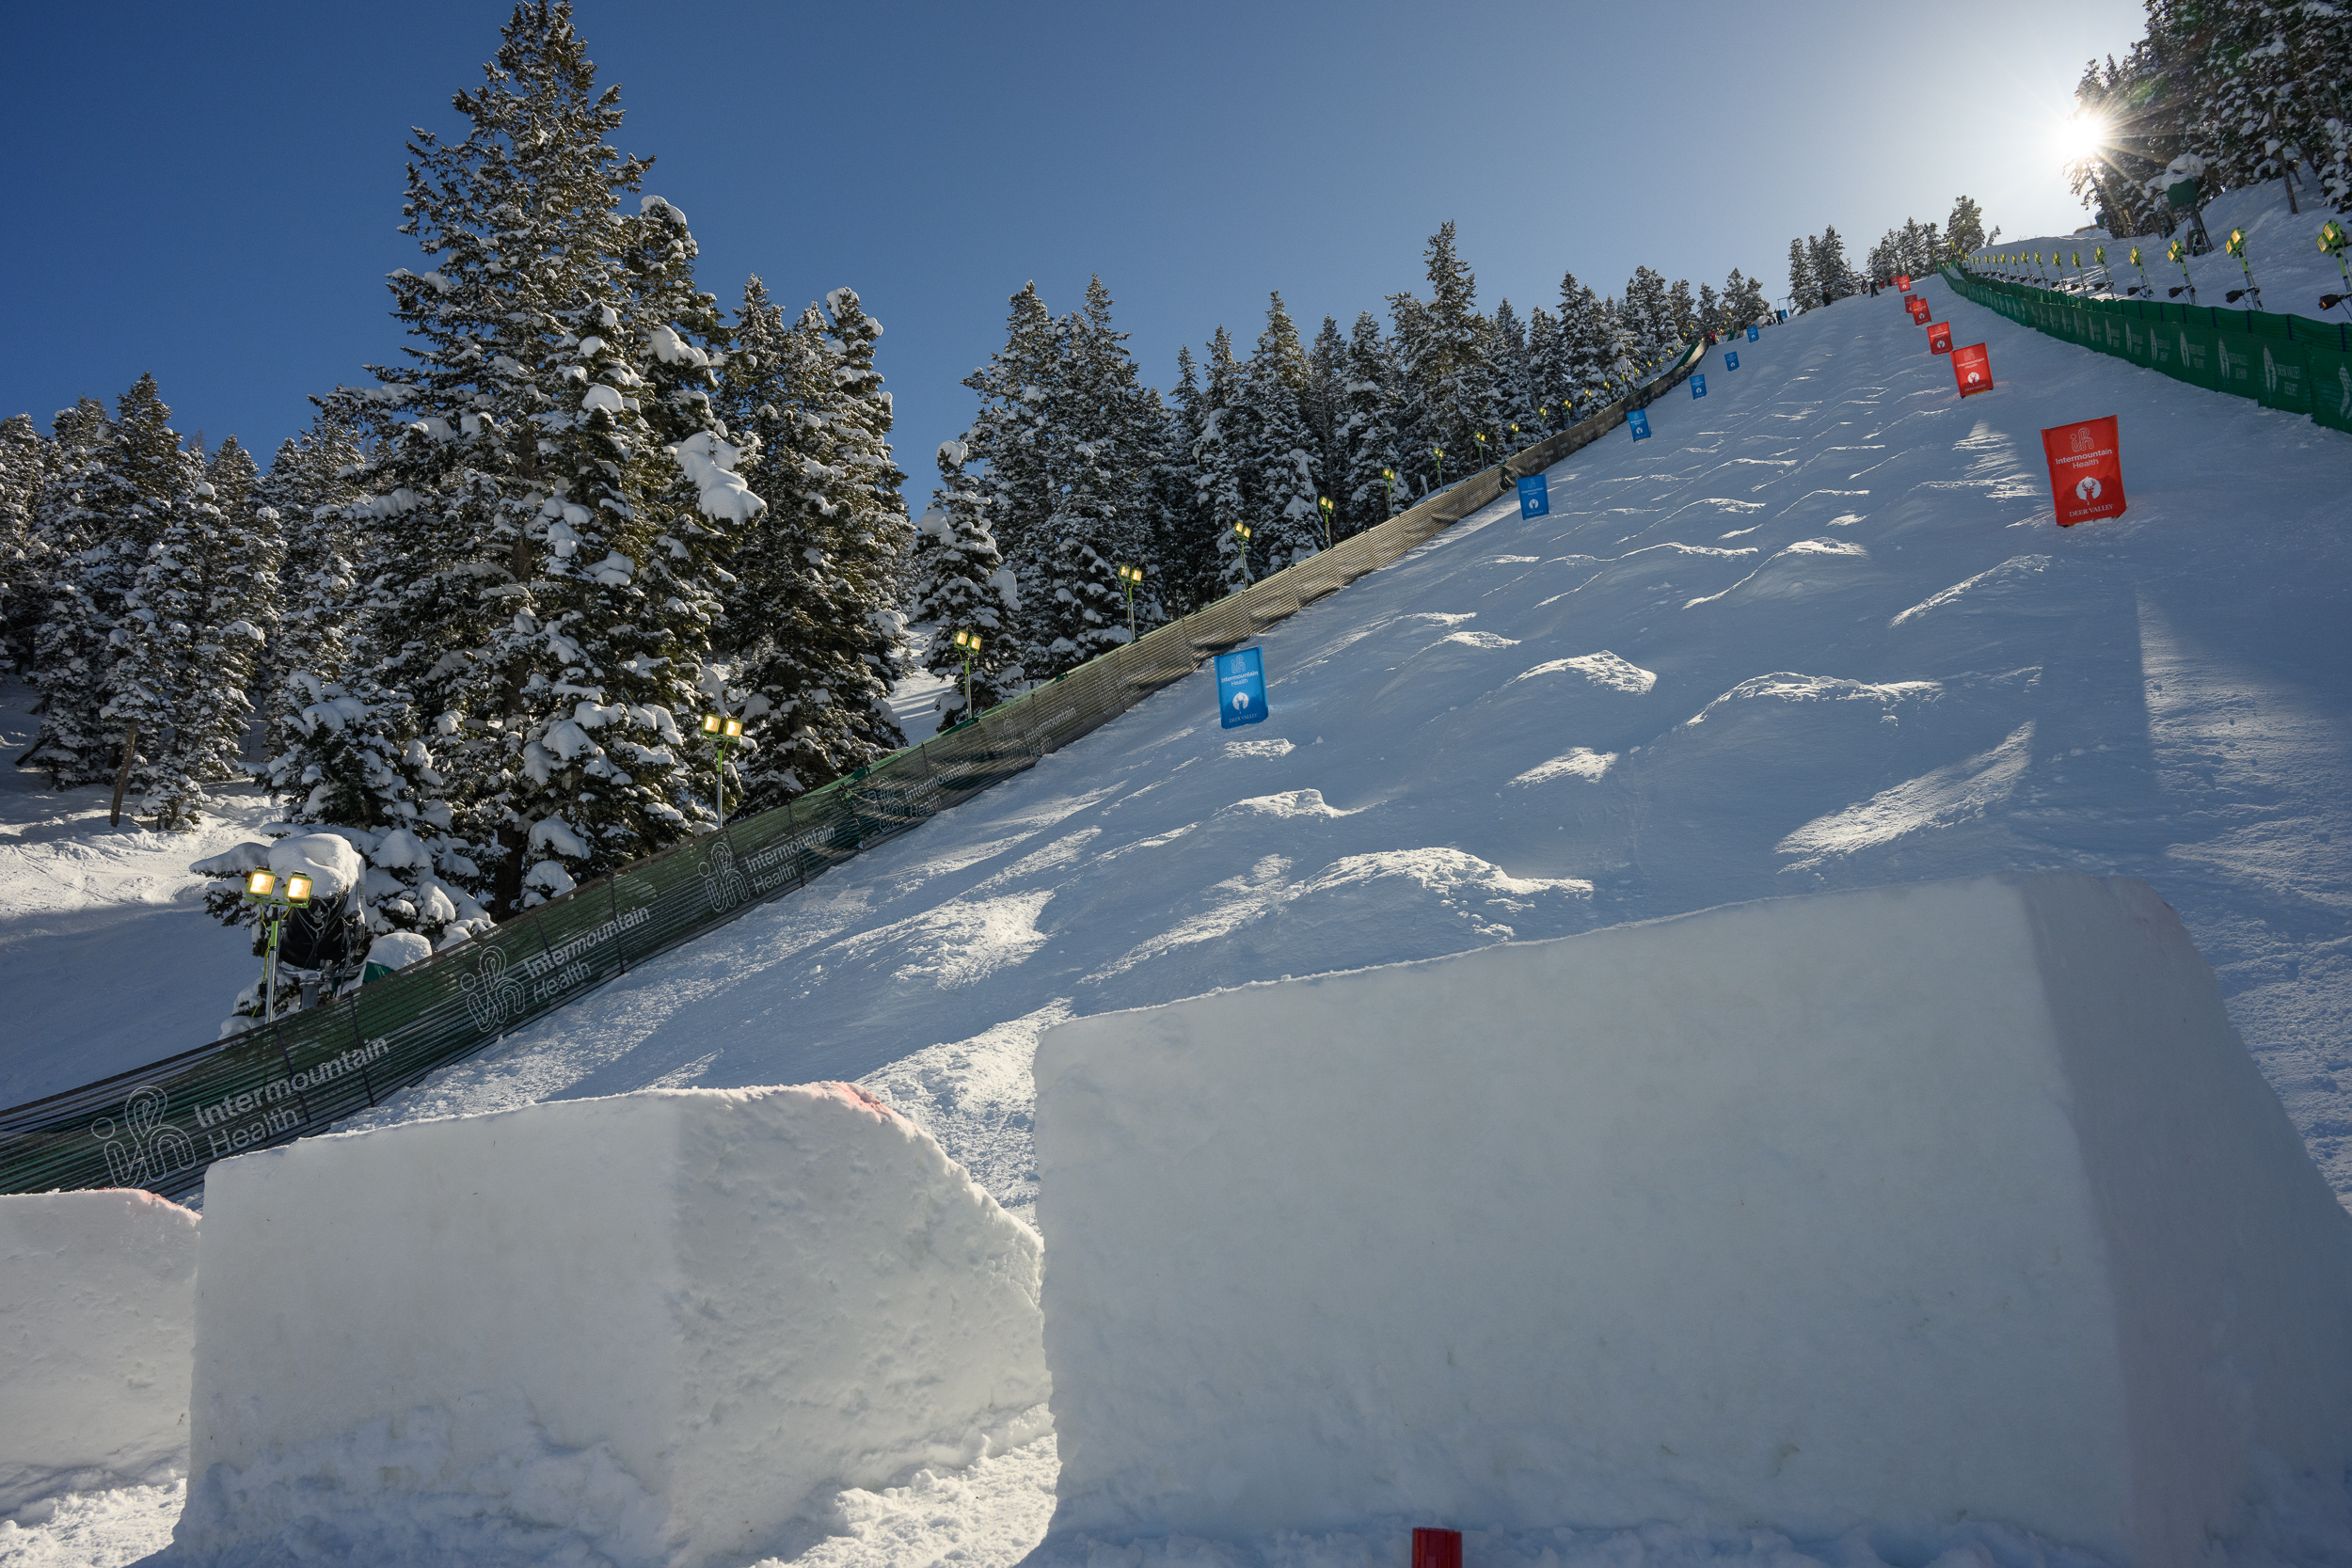 Photo of a moguls course in the sun